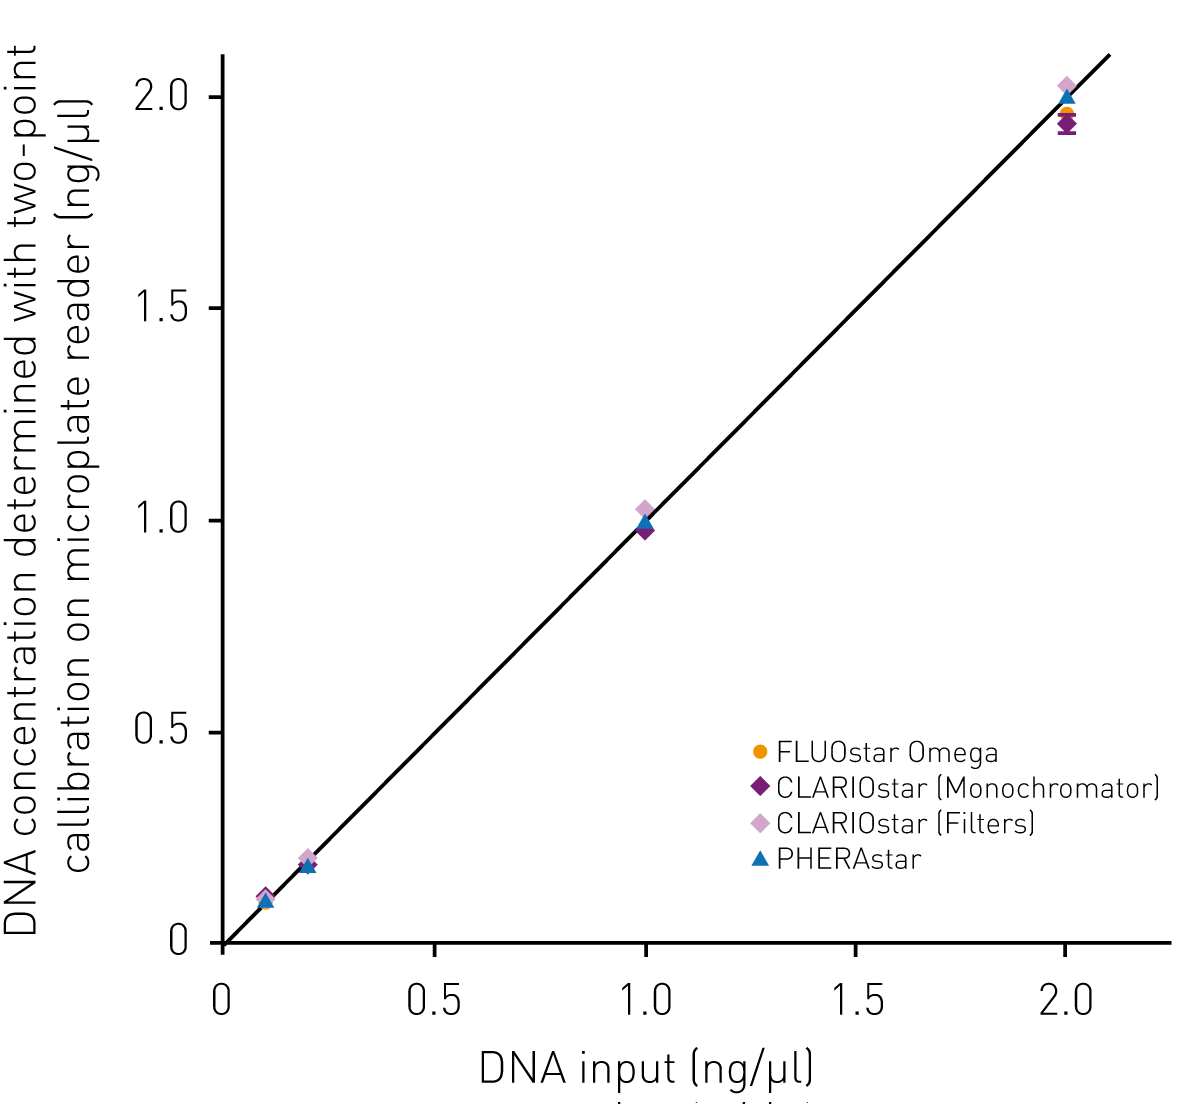 Fig. 3: DNA quantiﬁcation using Qubit dye and BMG LABTECH microplate readers. Triplicates with deﬁned DNA concentration were analyzed and DNA concentration was calculated using a two-point calibration line. Calibration curve was based on triplicates of negative control (no DNA) and 10 ng/μl DNA standard provided with the kit. Error bars indicate standard deviation.